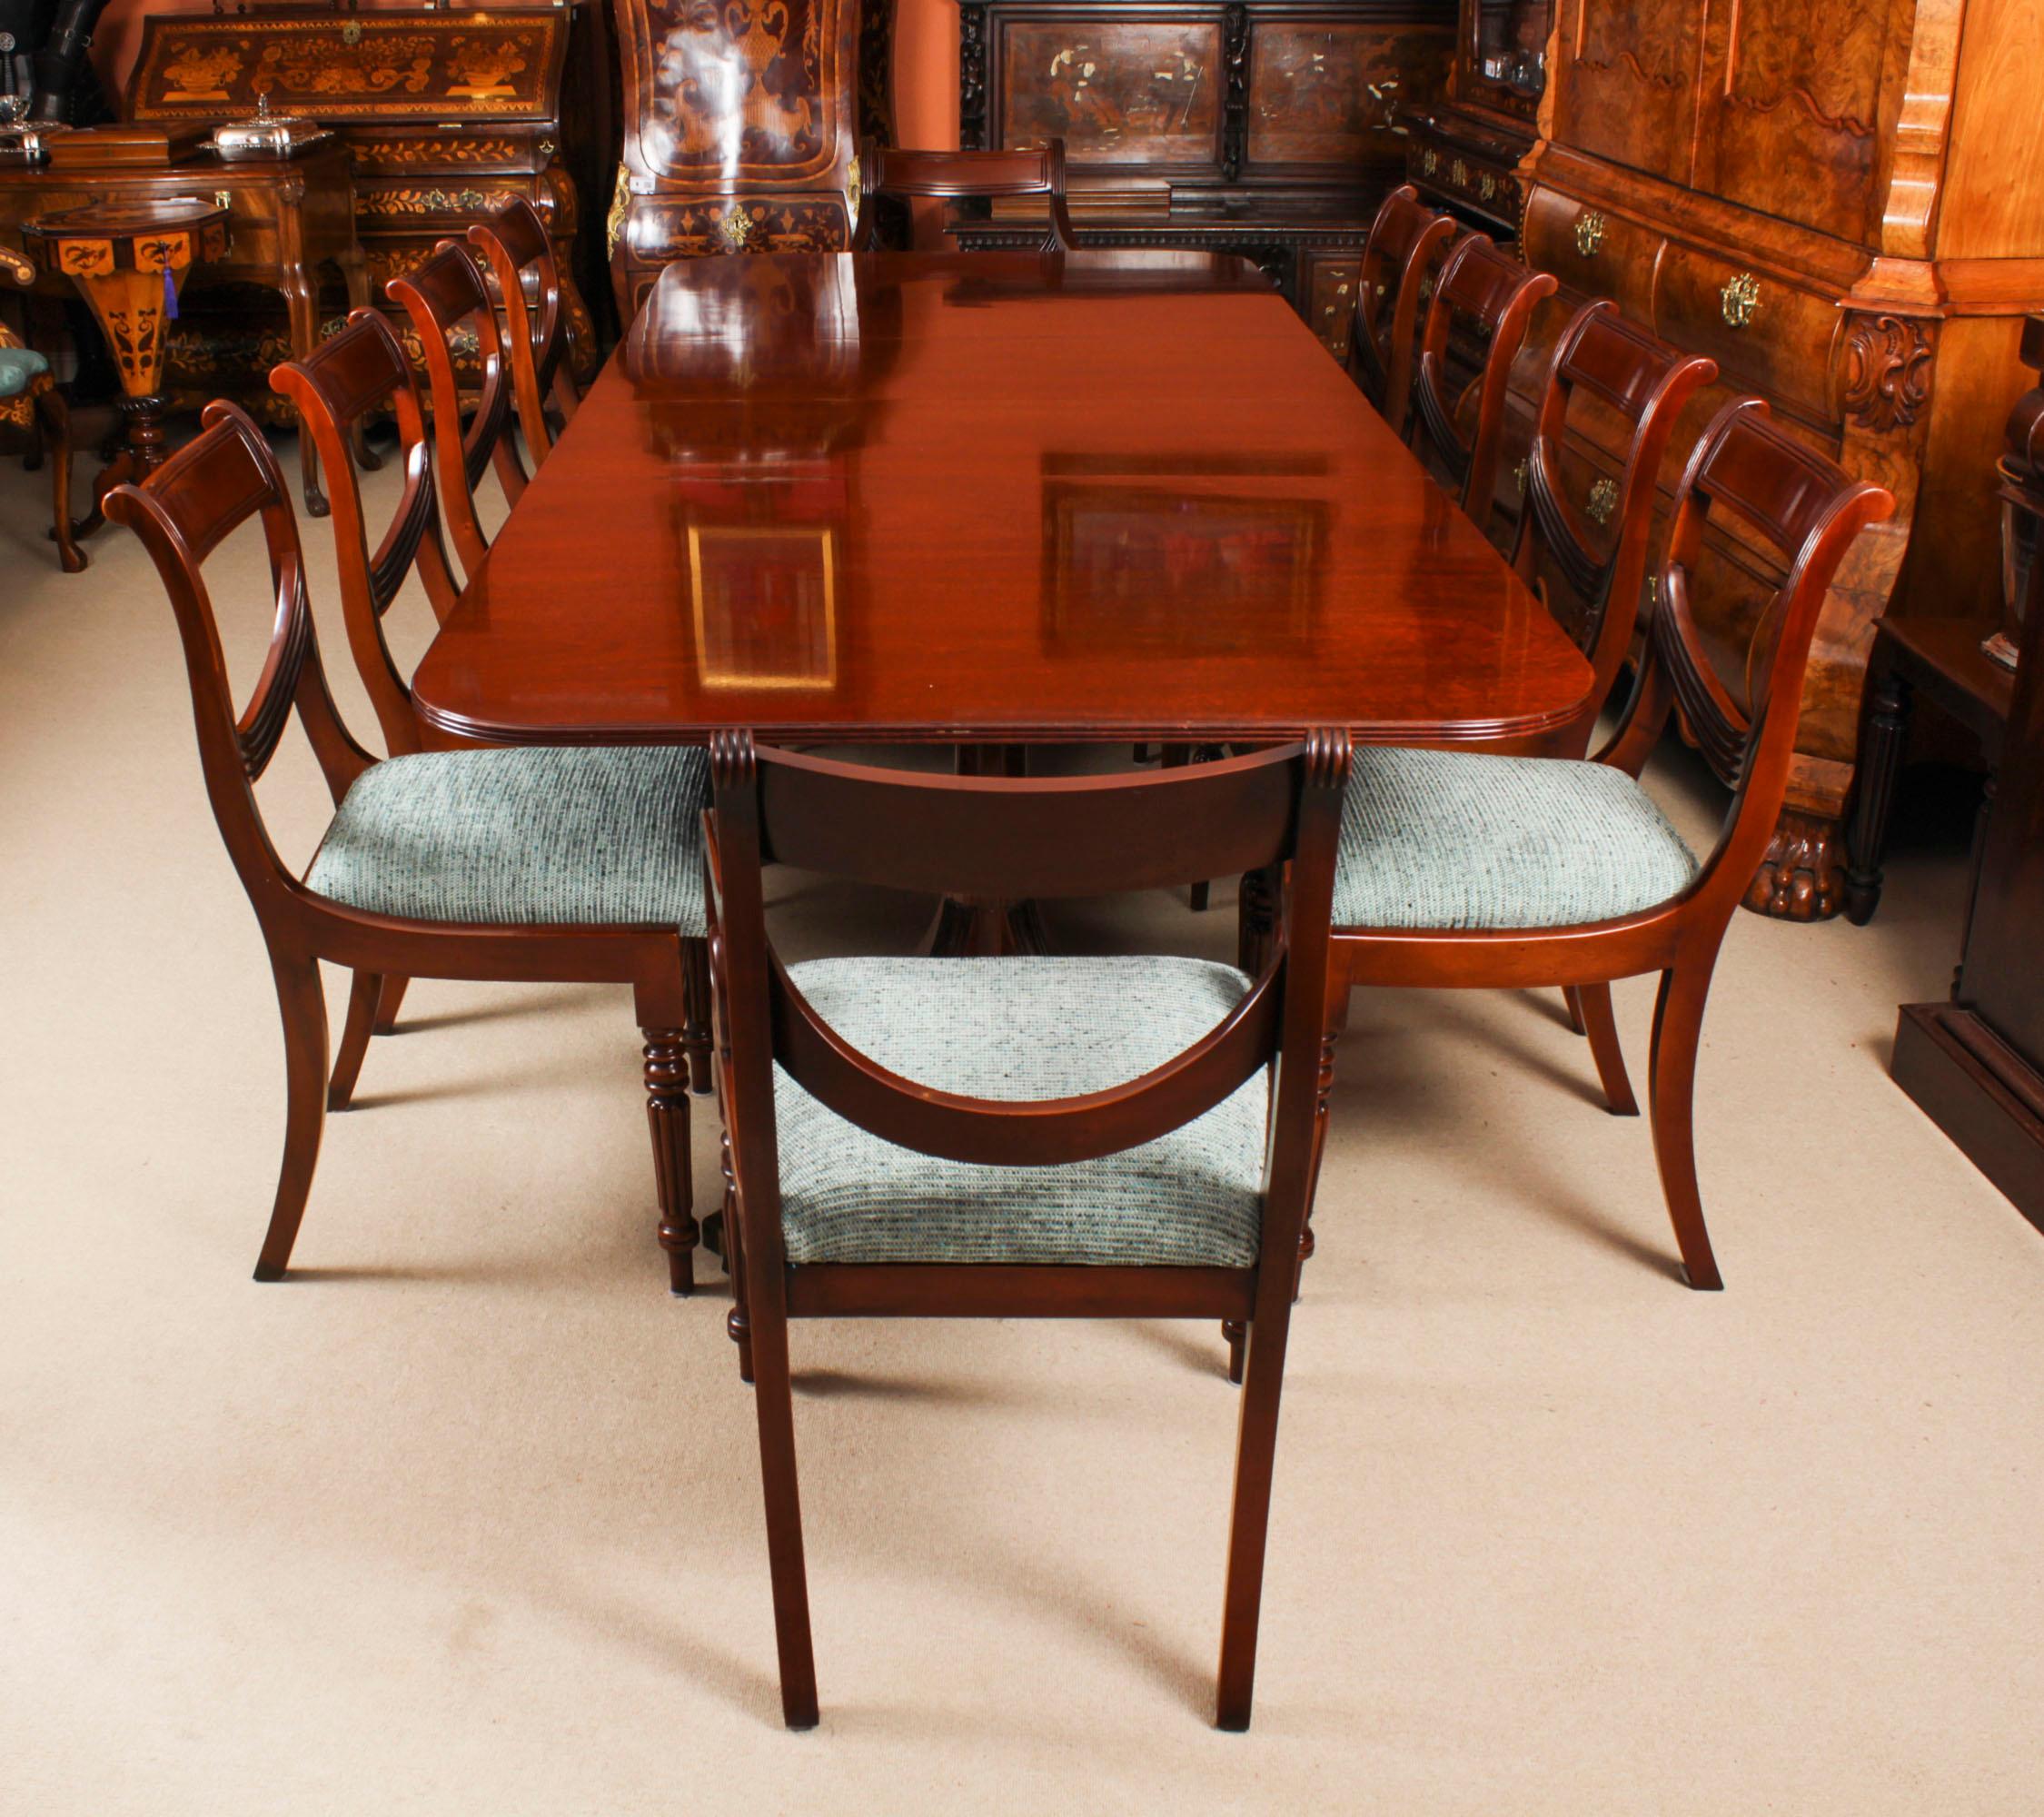 This is  a fabulous Vintage Regency Revival dining set comprising a  dining table and a set of ten Swag Back dining chairs,  by the master craftsman, William Tillman, Circa 1980 in date.

The table is made of stunning solid mahogany and is raised on